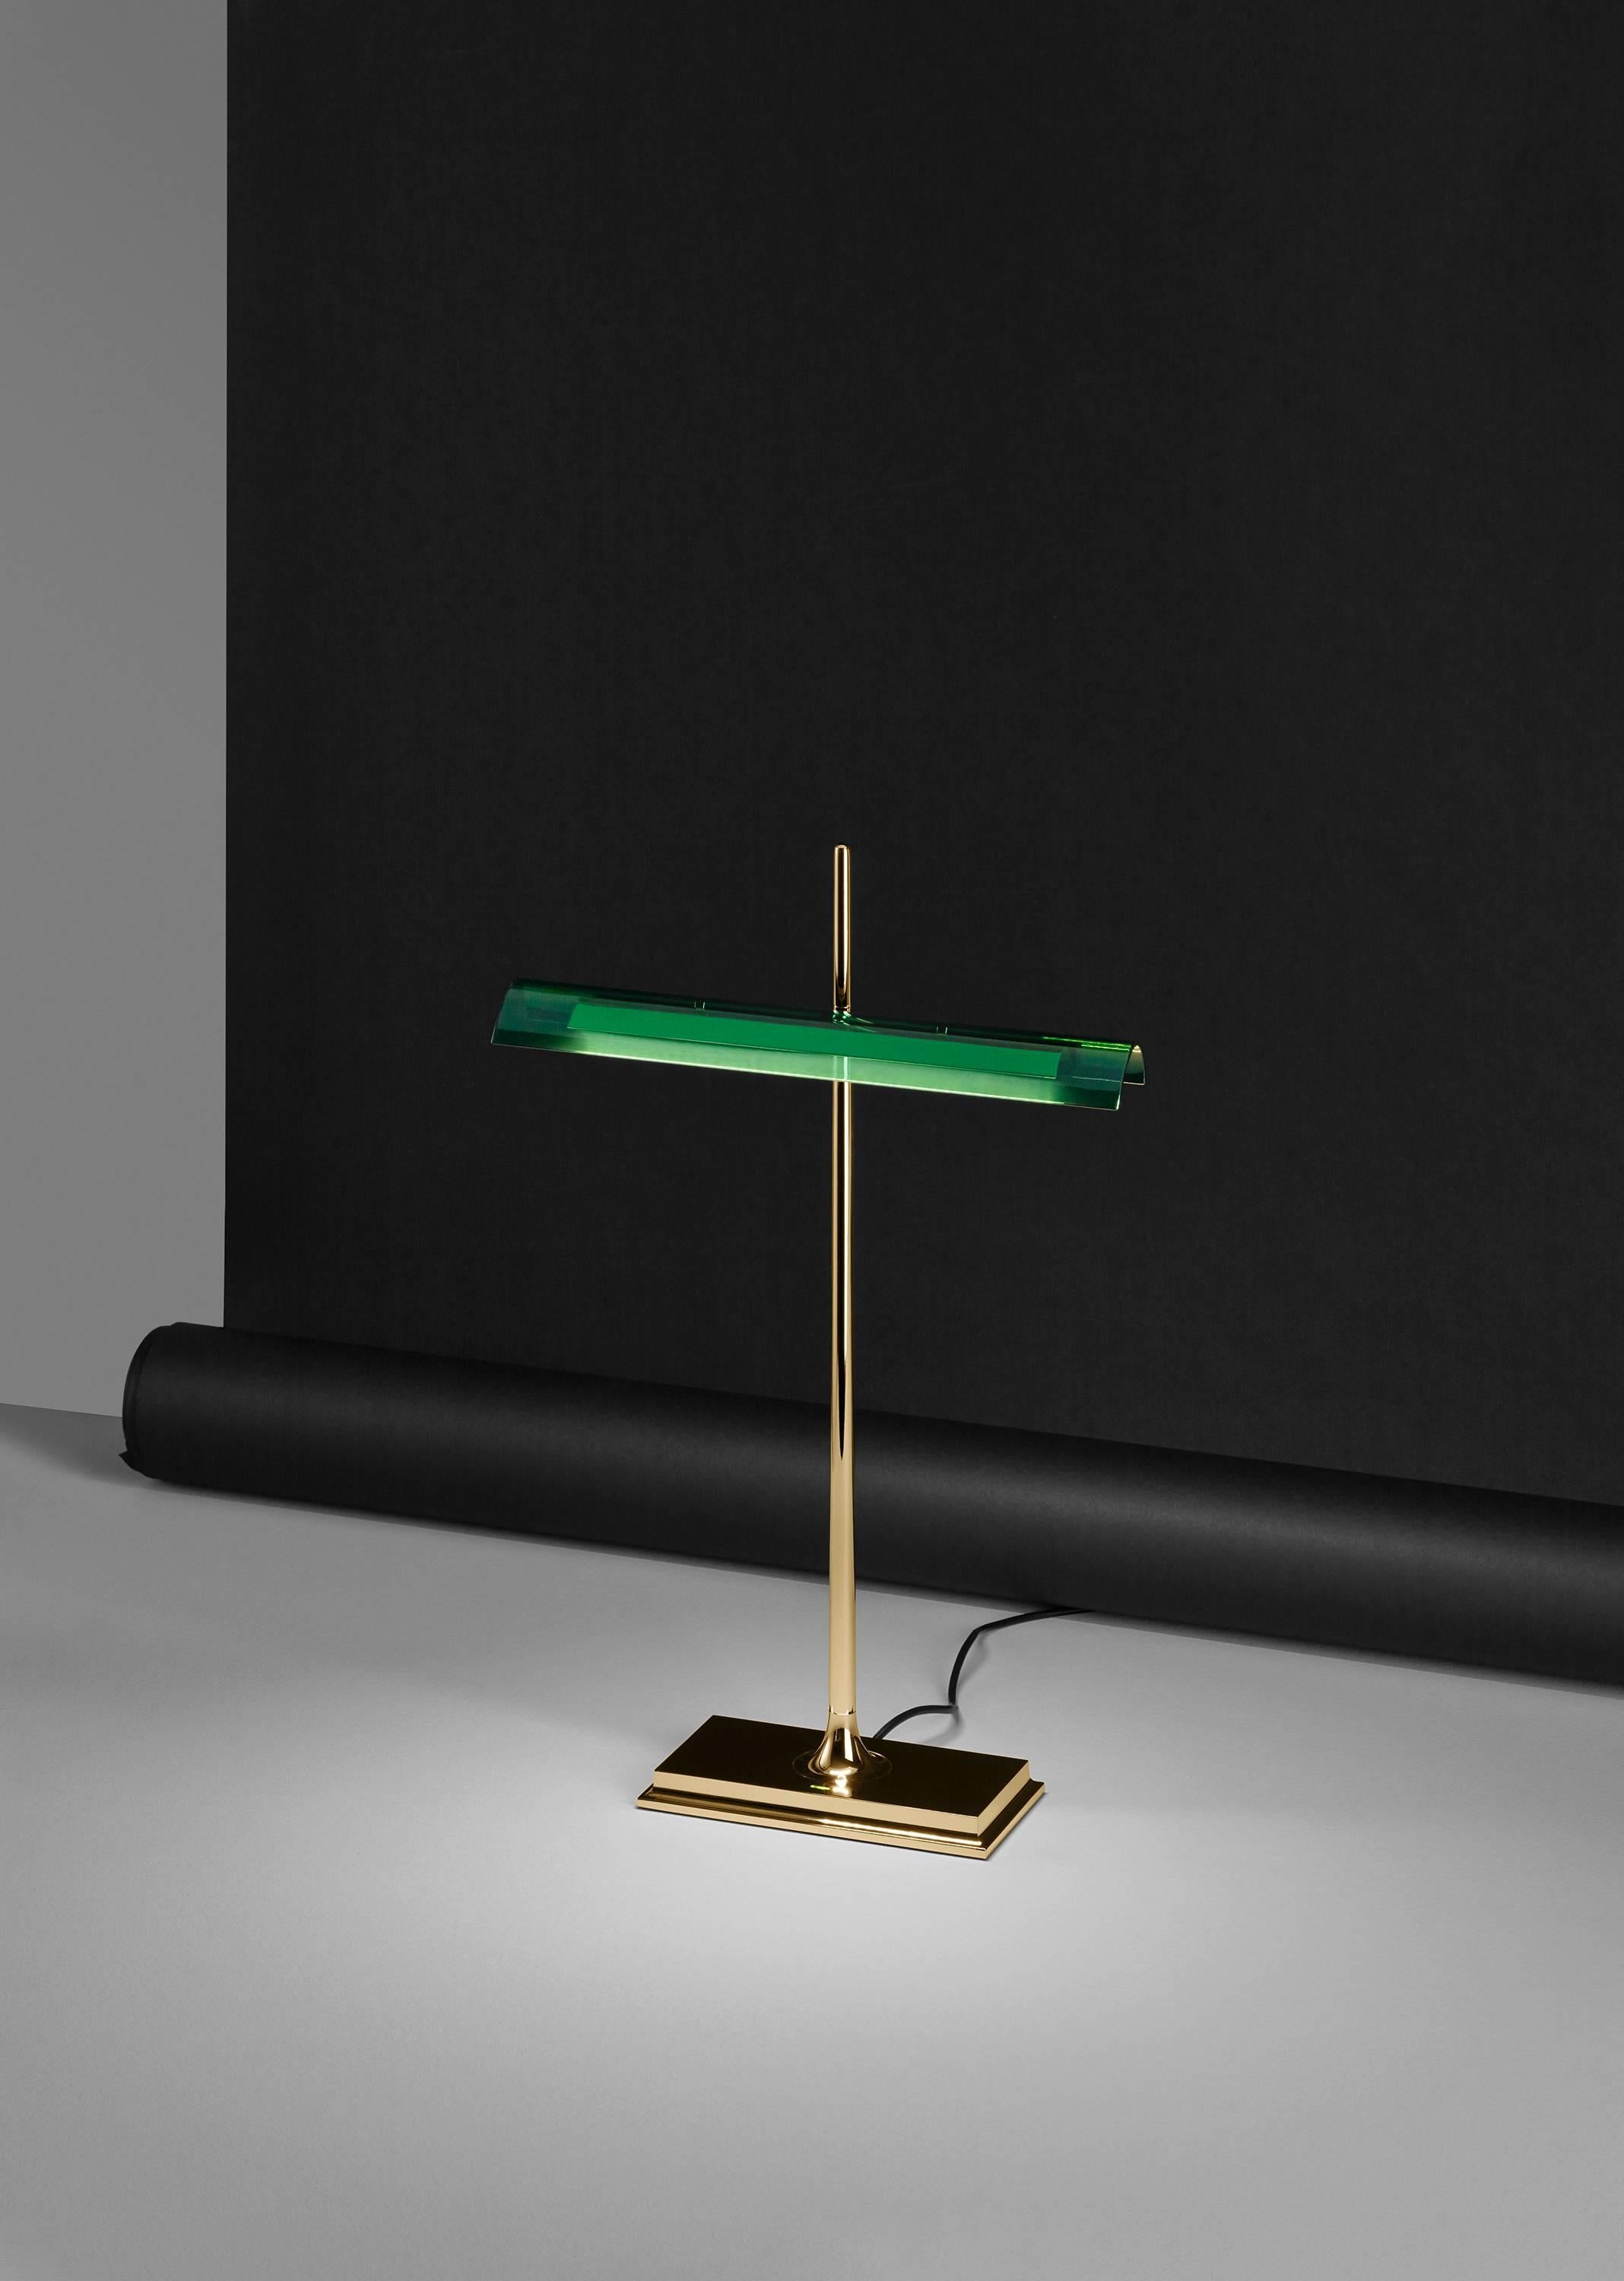 This well-known design gets a technological twist thanks to artist Ron Gilad, who created the Goldman to feature diffusers made of clear methacrylate and an aluminum frame. There is a USB plug built into the base, as well as an optical switch that